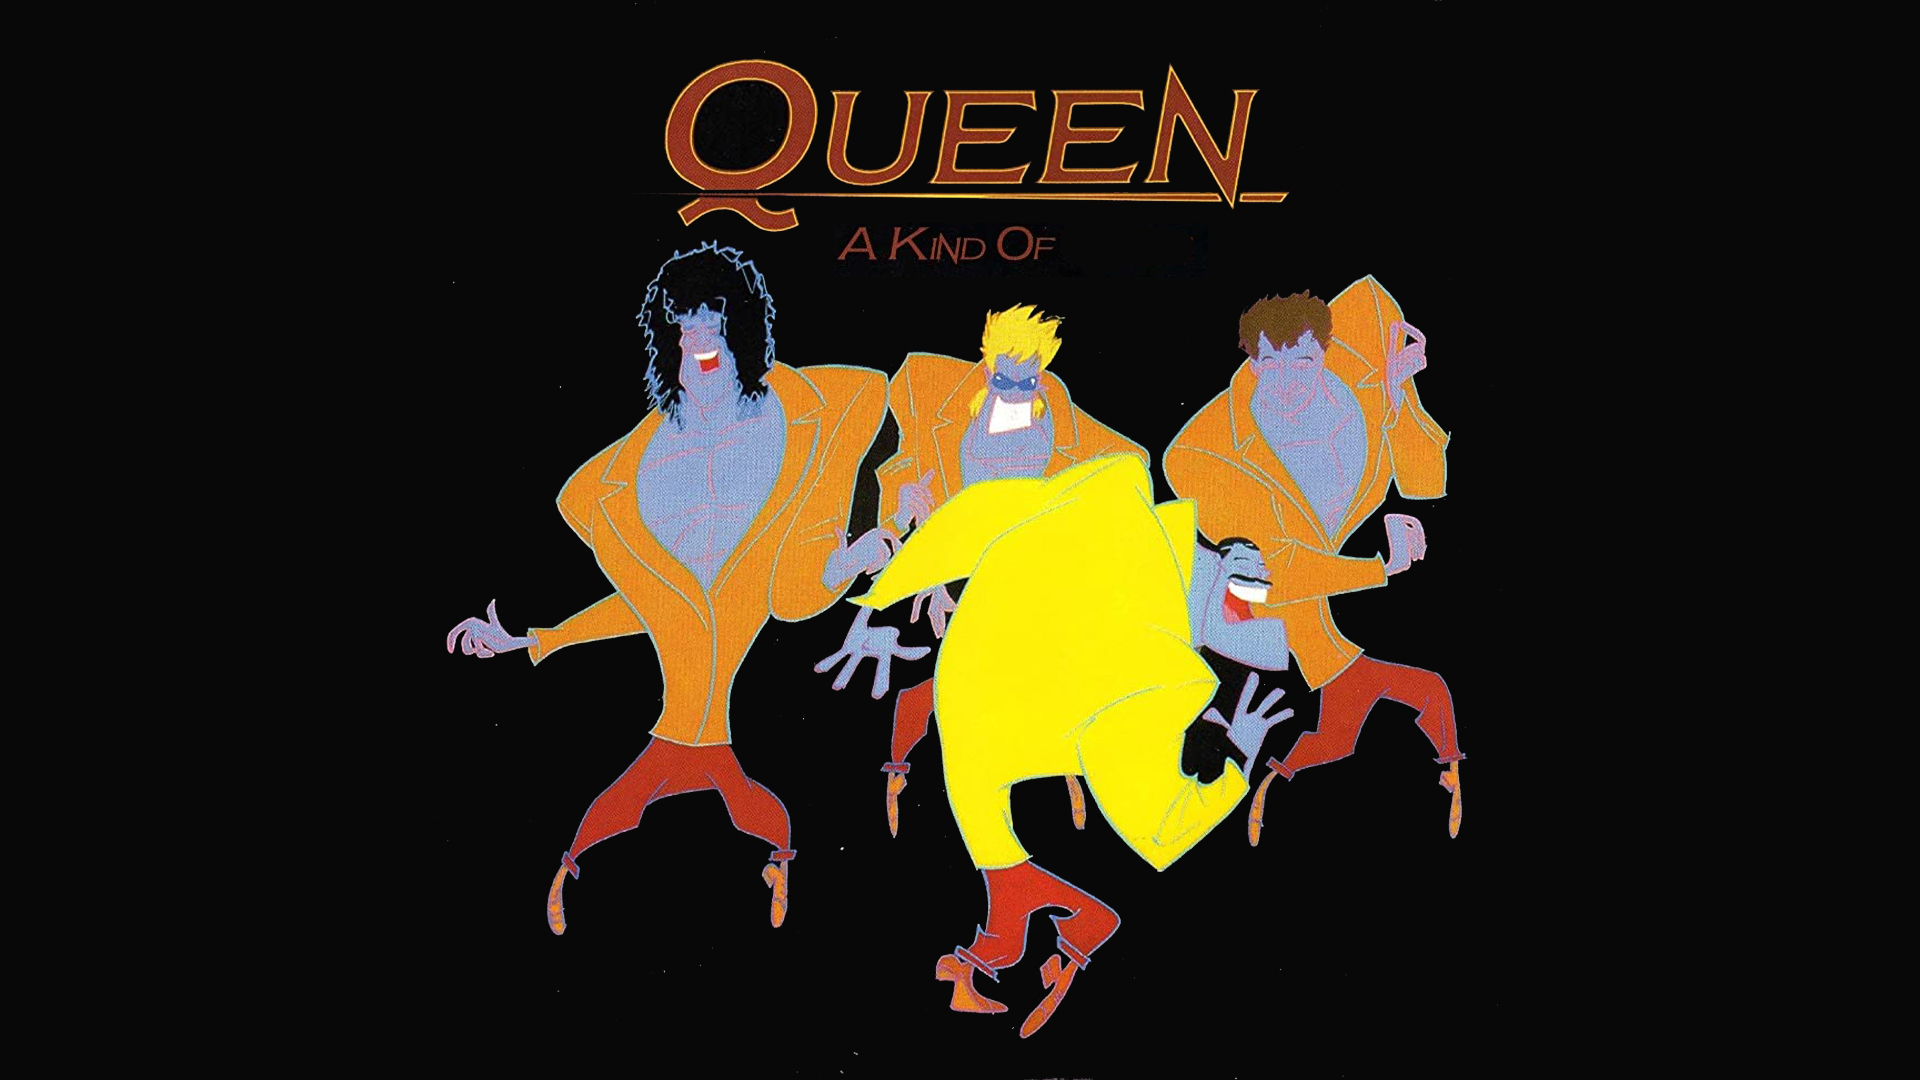 Queen artwork for a 1986 hit single